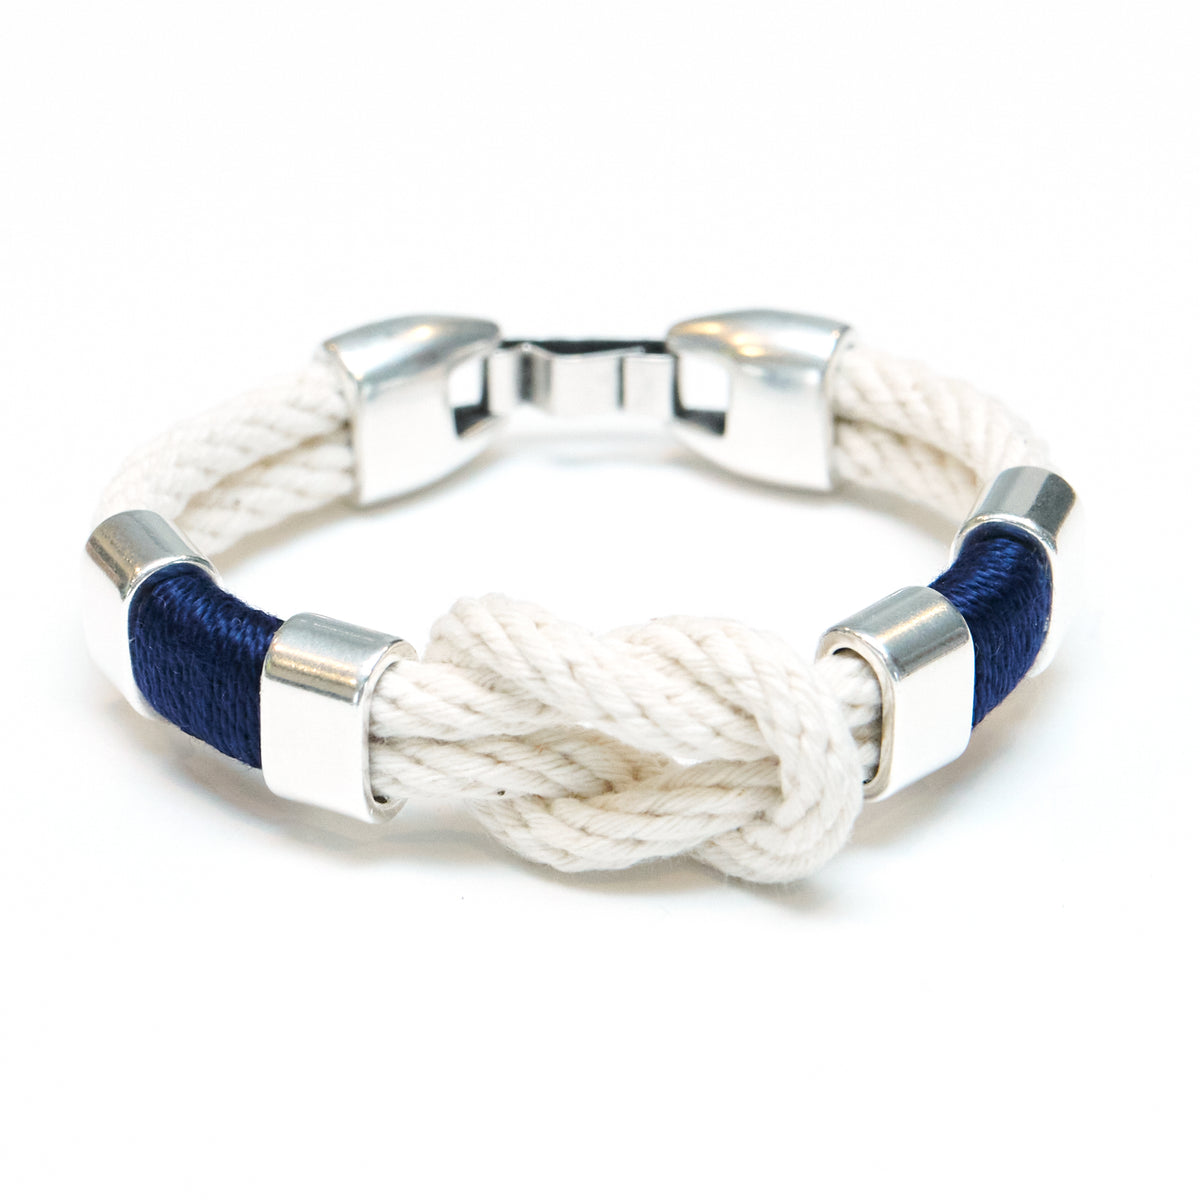 Starboard - Ivory/Navy/Silver